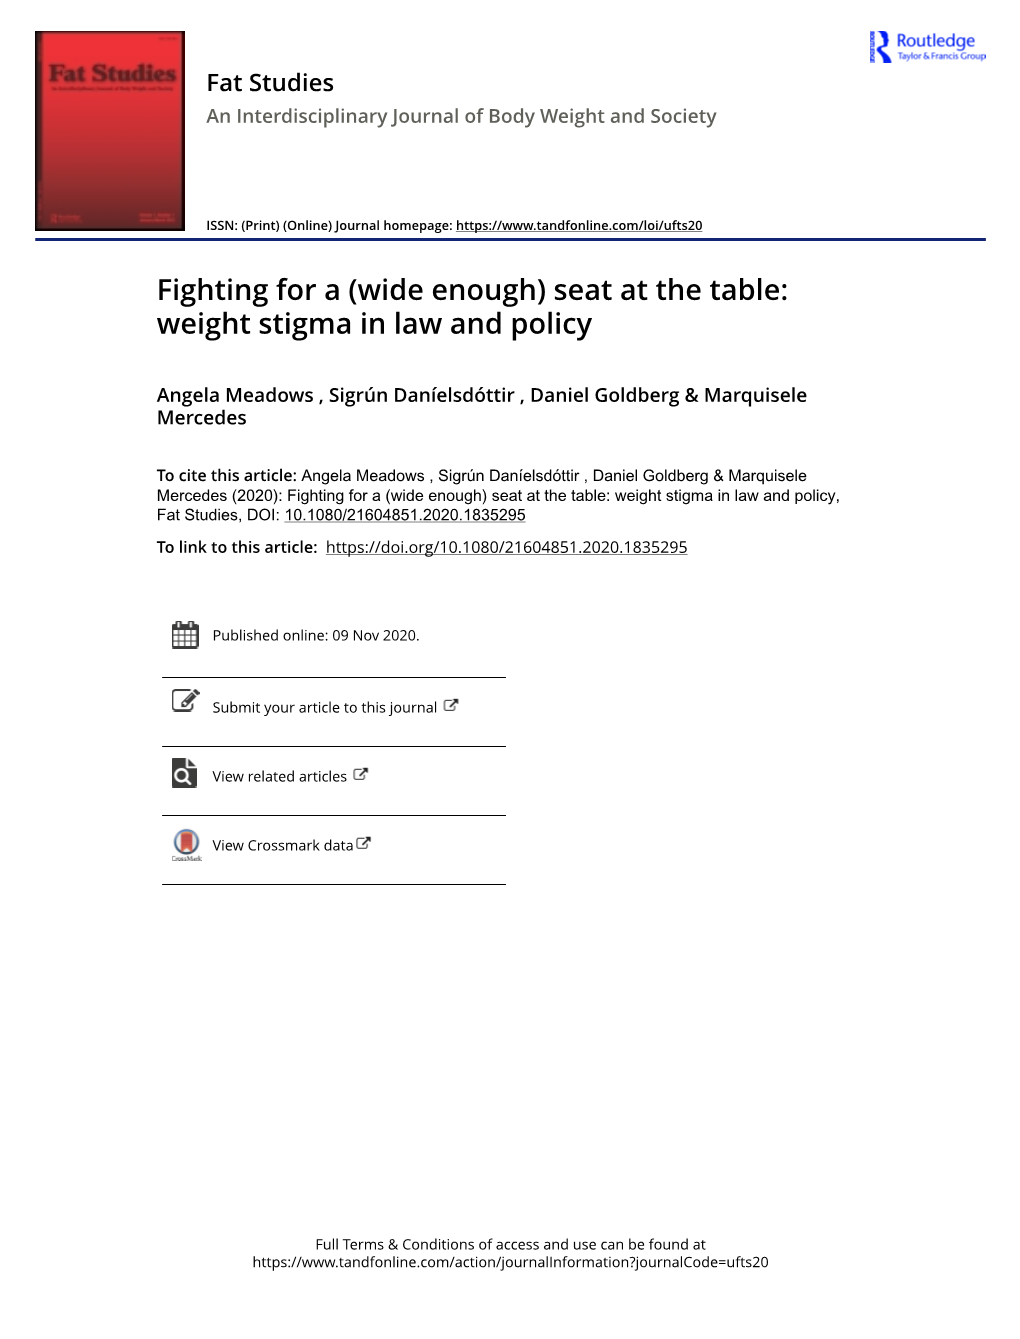 Fighting for a (Wide Enough) Seat at the Table: Weight Stigma in Law and Policy